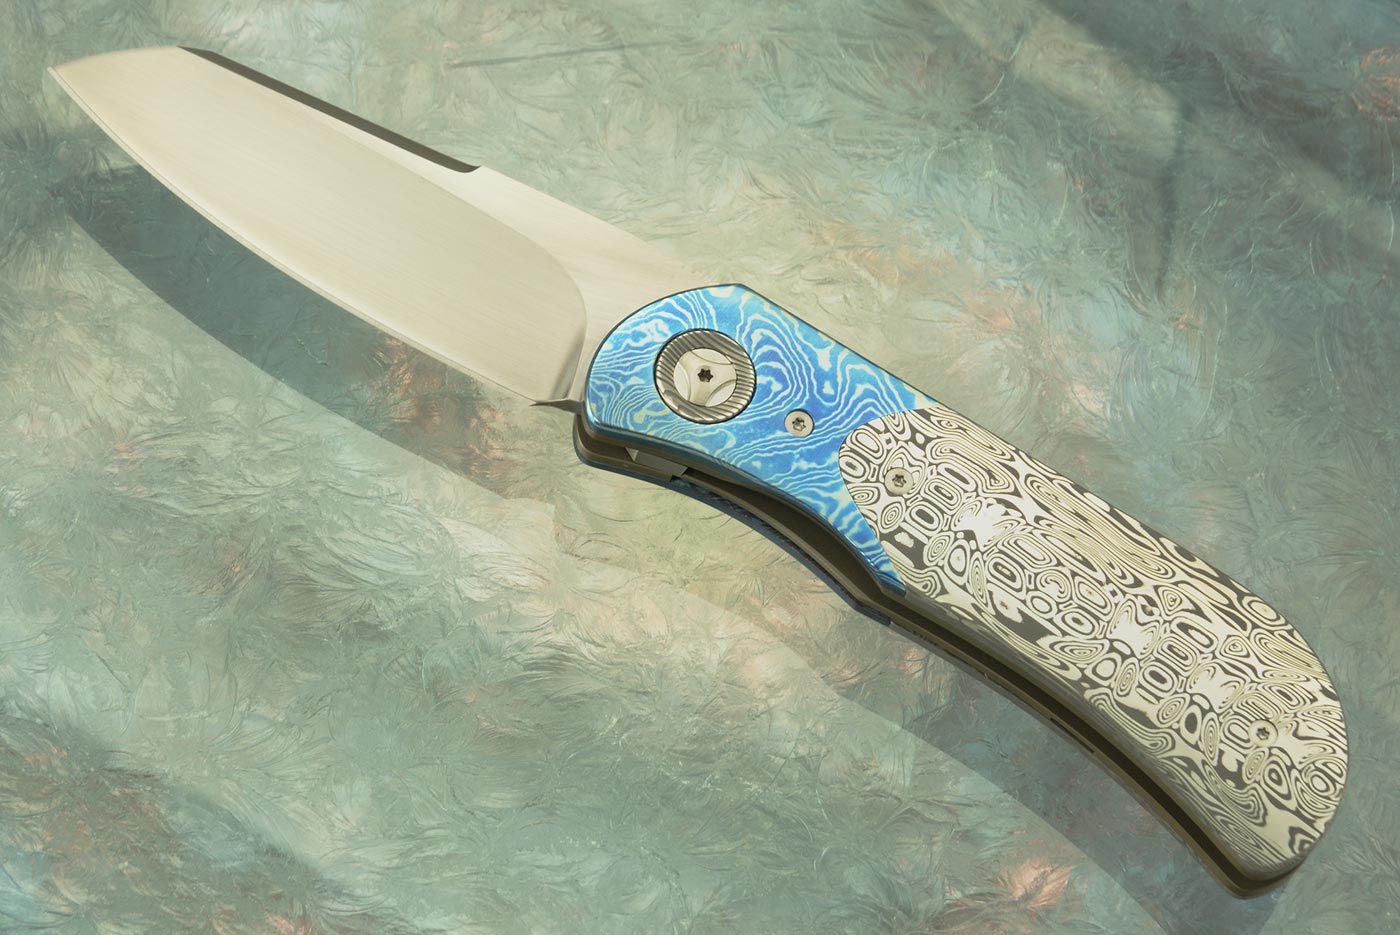 EXK Plus Front Flipper with Timascus and Damasteel - M390